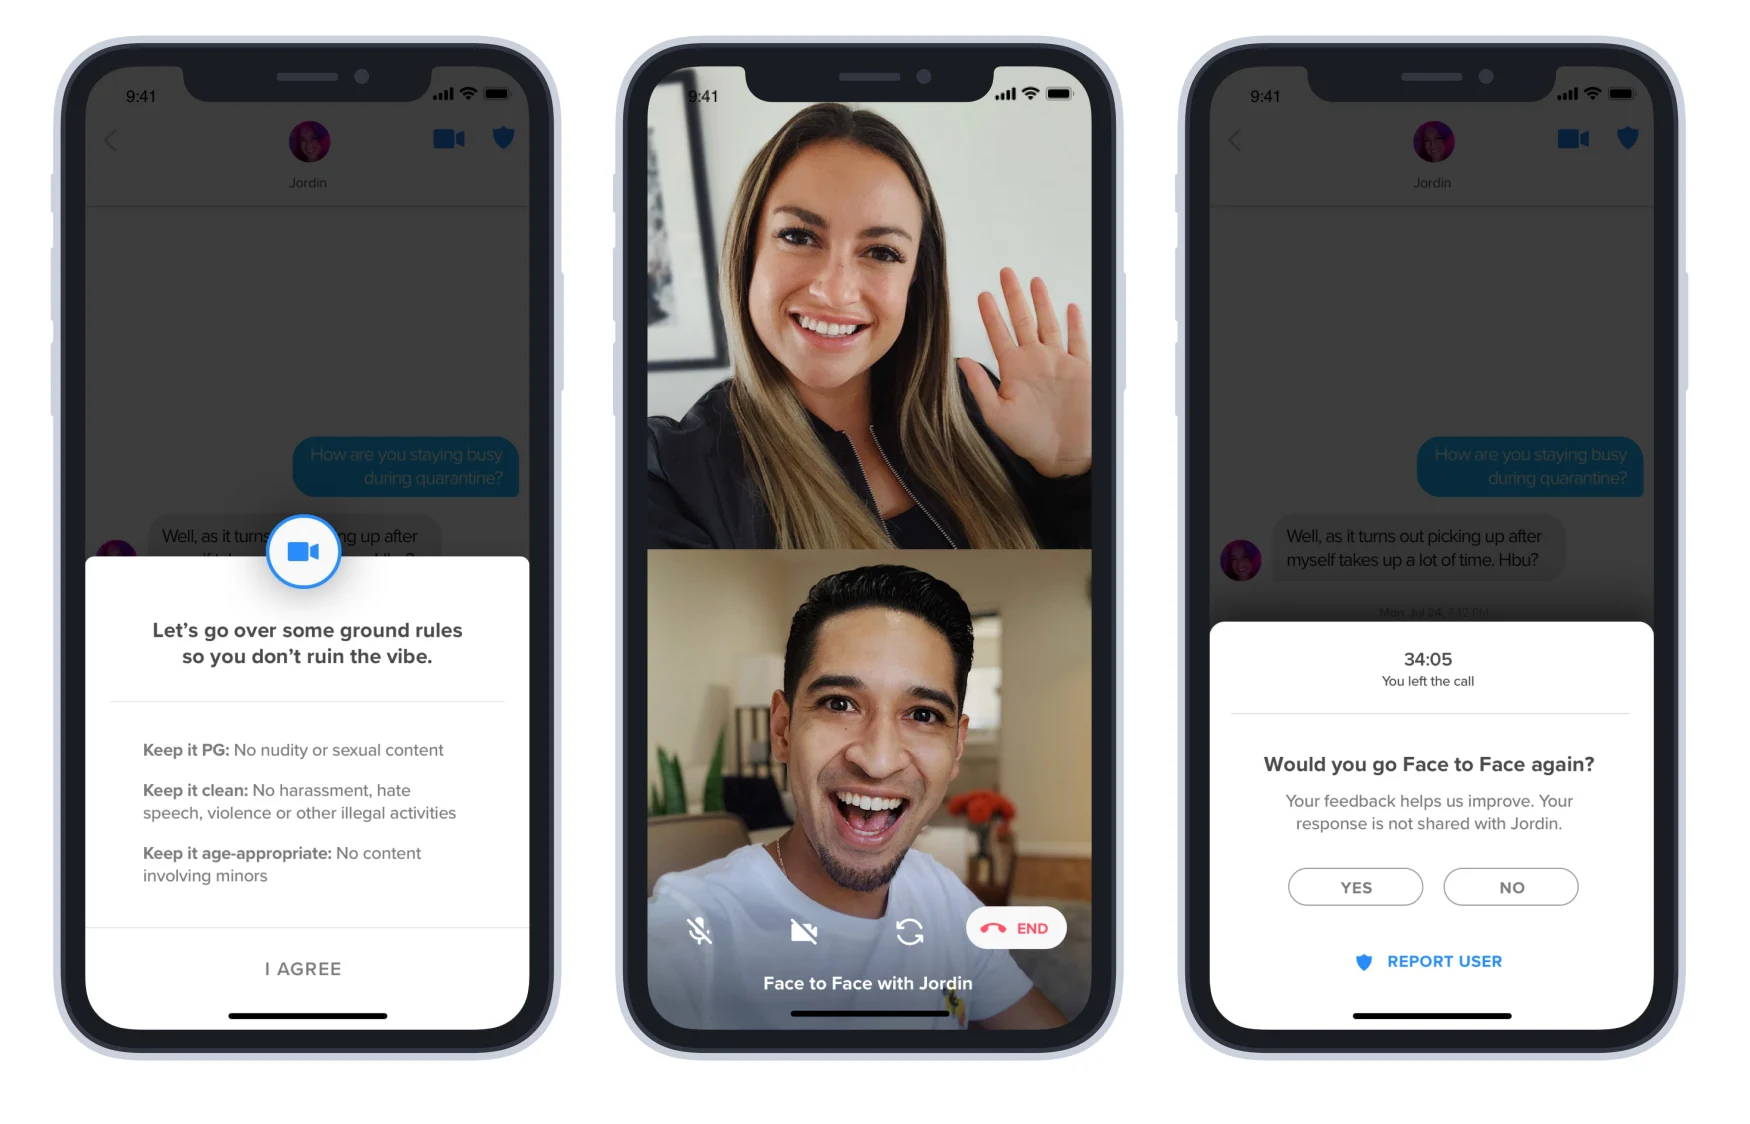 Tinder Face to Face video chat feature